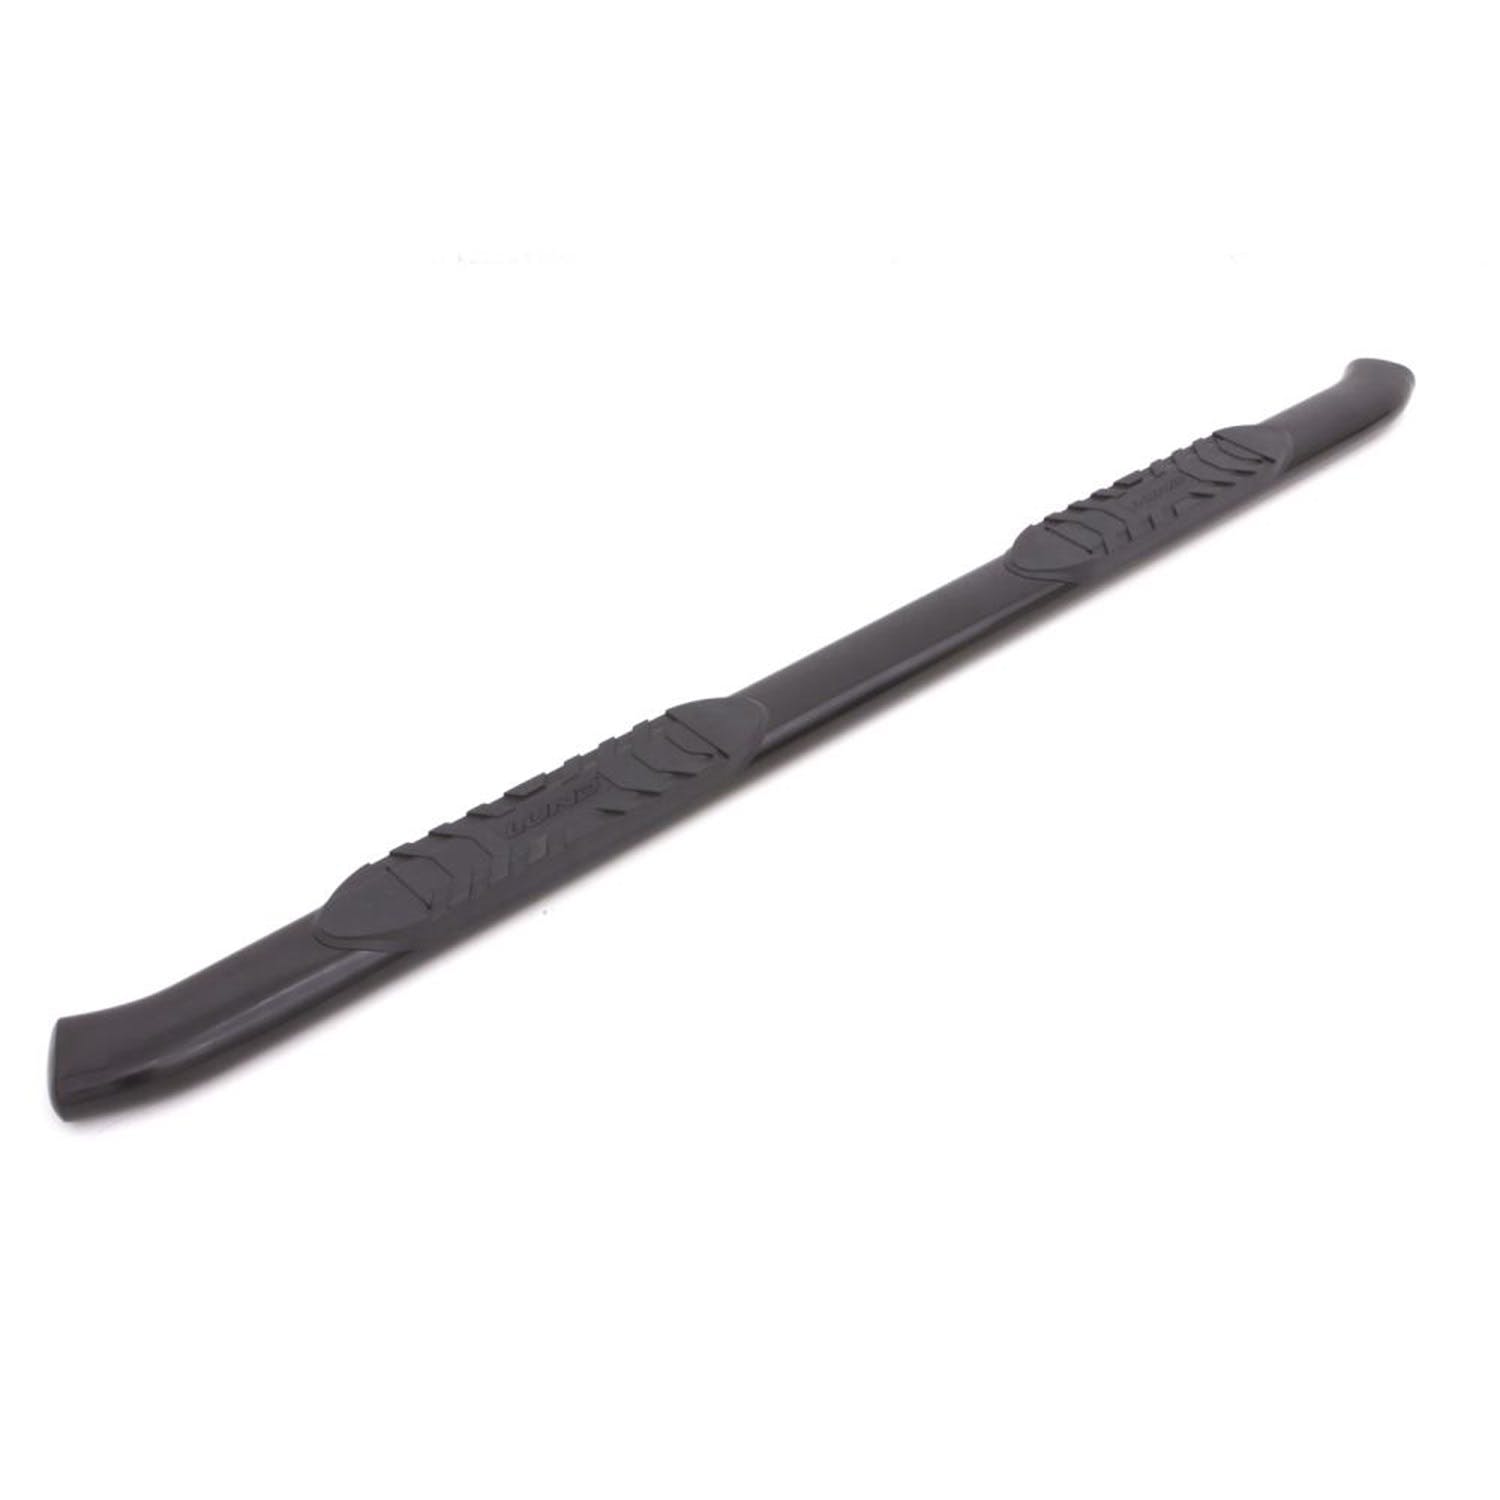 LUND 24291007 5 Inch Oval Curved Nerf Bar - Black LUND -5 inch CURVED OVAL BLACK SS